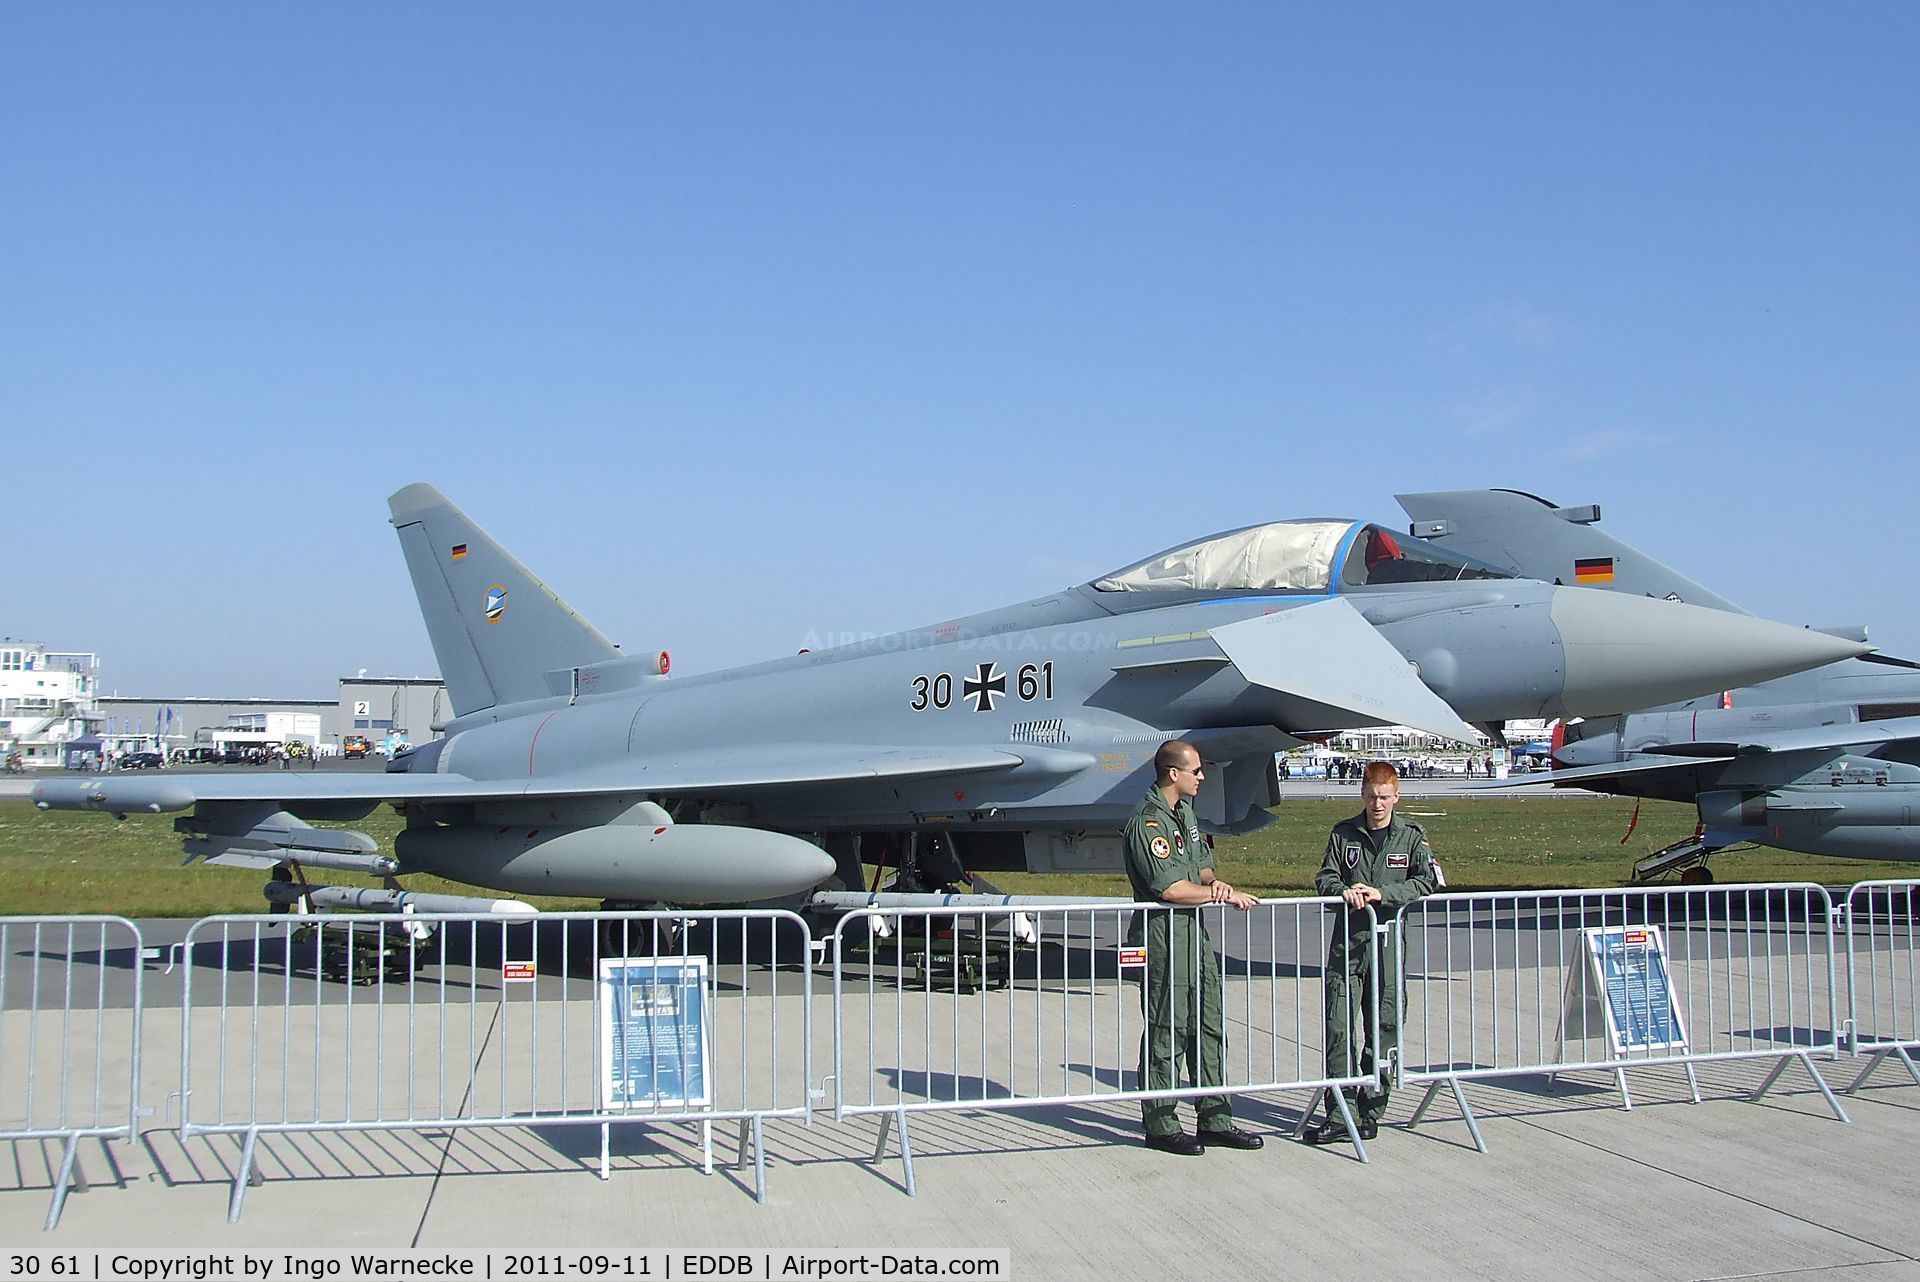 30 61, Eurofighter EF-2000 Typhoon S C/N GS044, Eurofighter EF2000 of the Luftwaffe (German air force) at the ILA 2012, Berlin